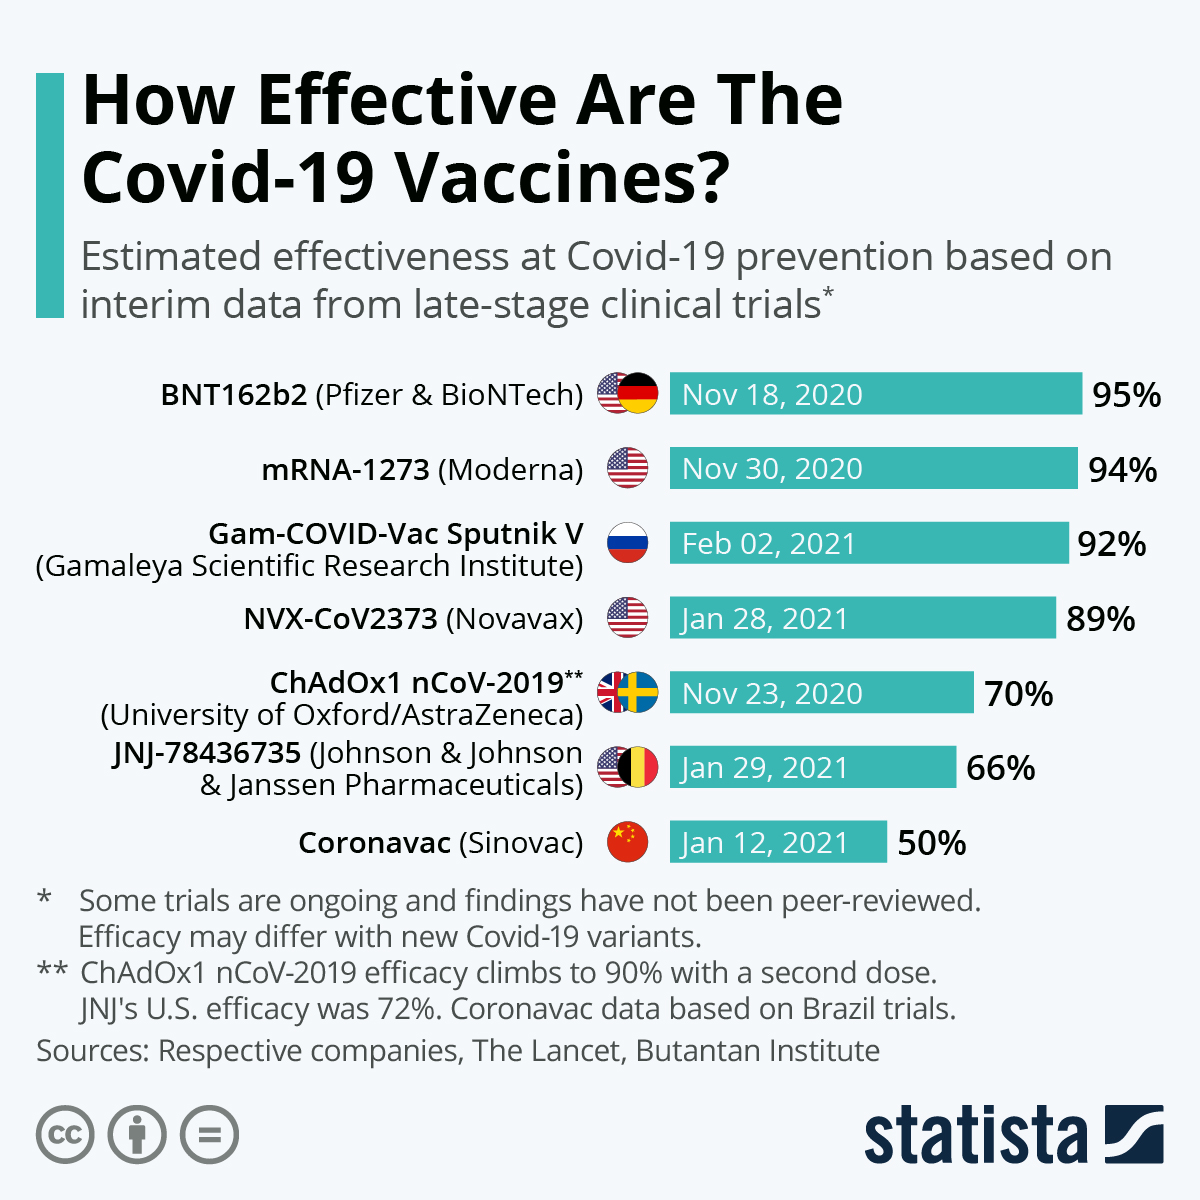 How Effective Are The Covid-19 Vaccines